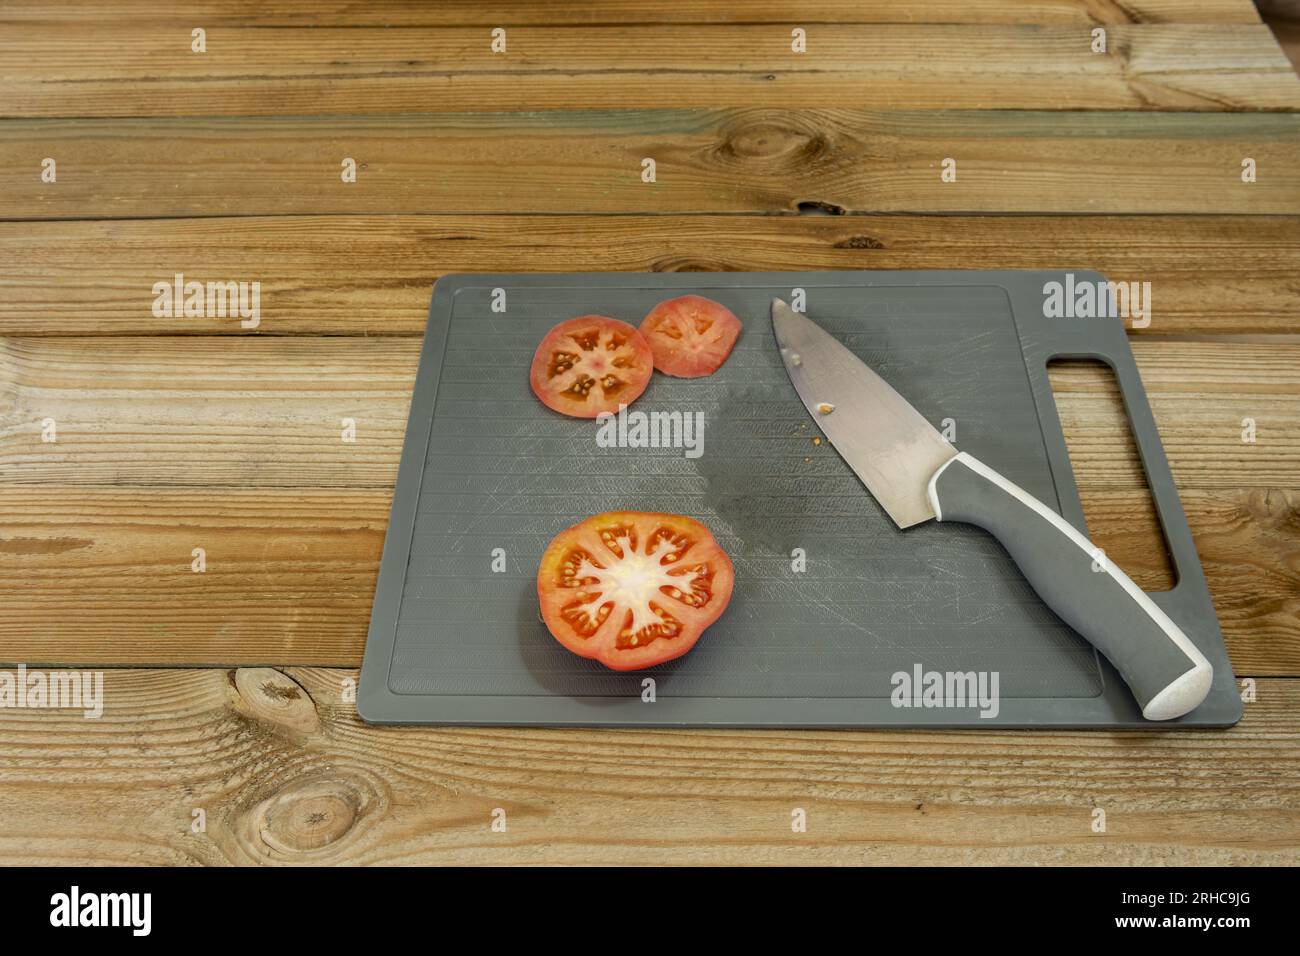 A few slices of ripe tomato cut on a gray synthetic material board with a sharp knife on an unvarnished wooden table Stock Photo